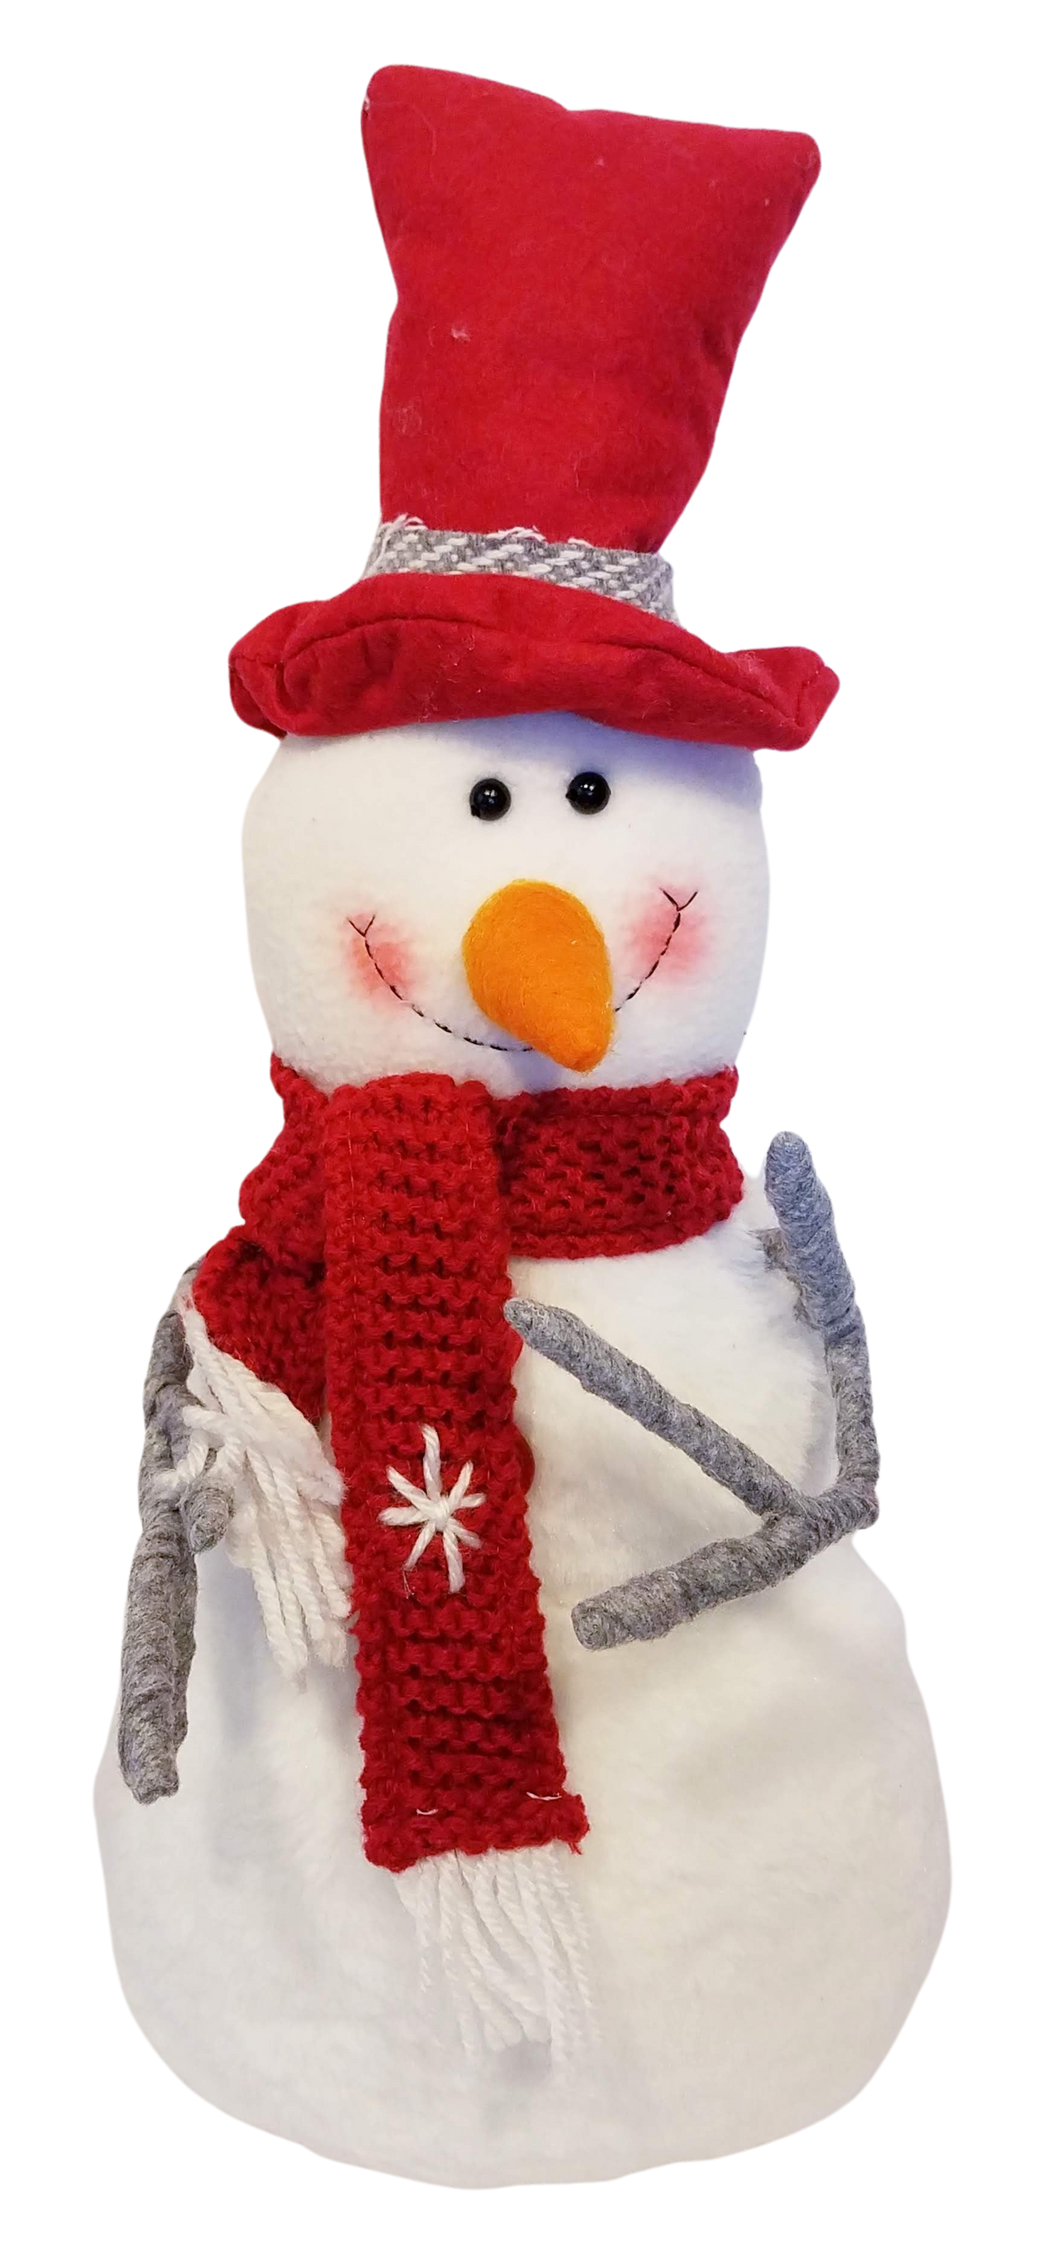 Plush Snowman with Red Scarf and Red Top Hat 17